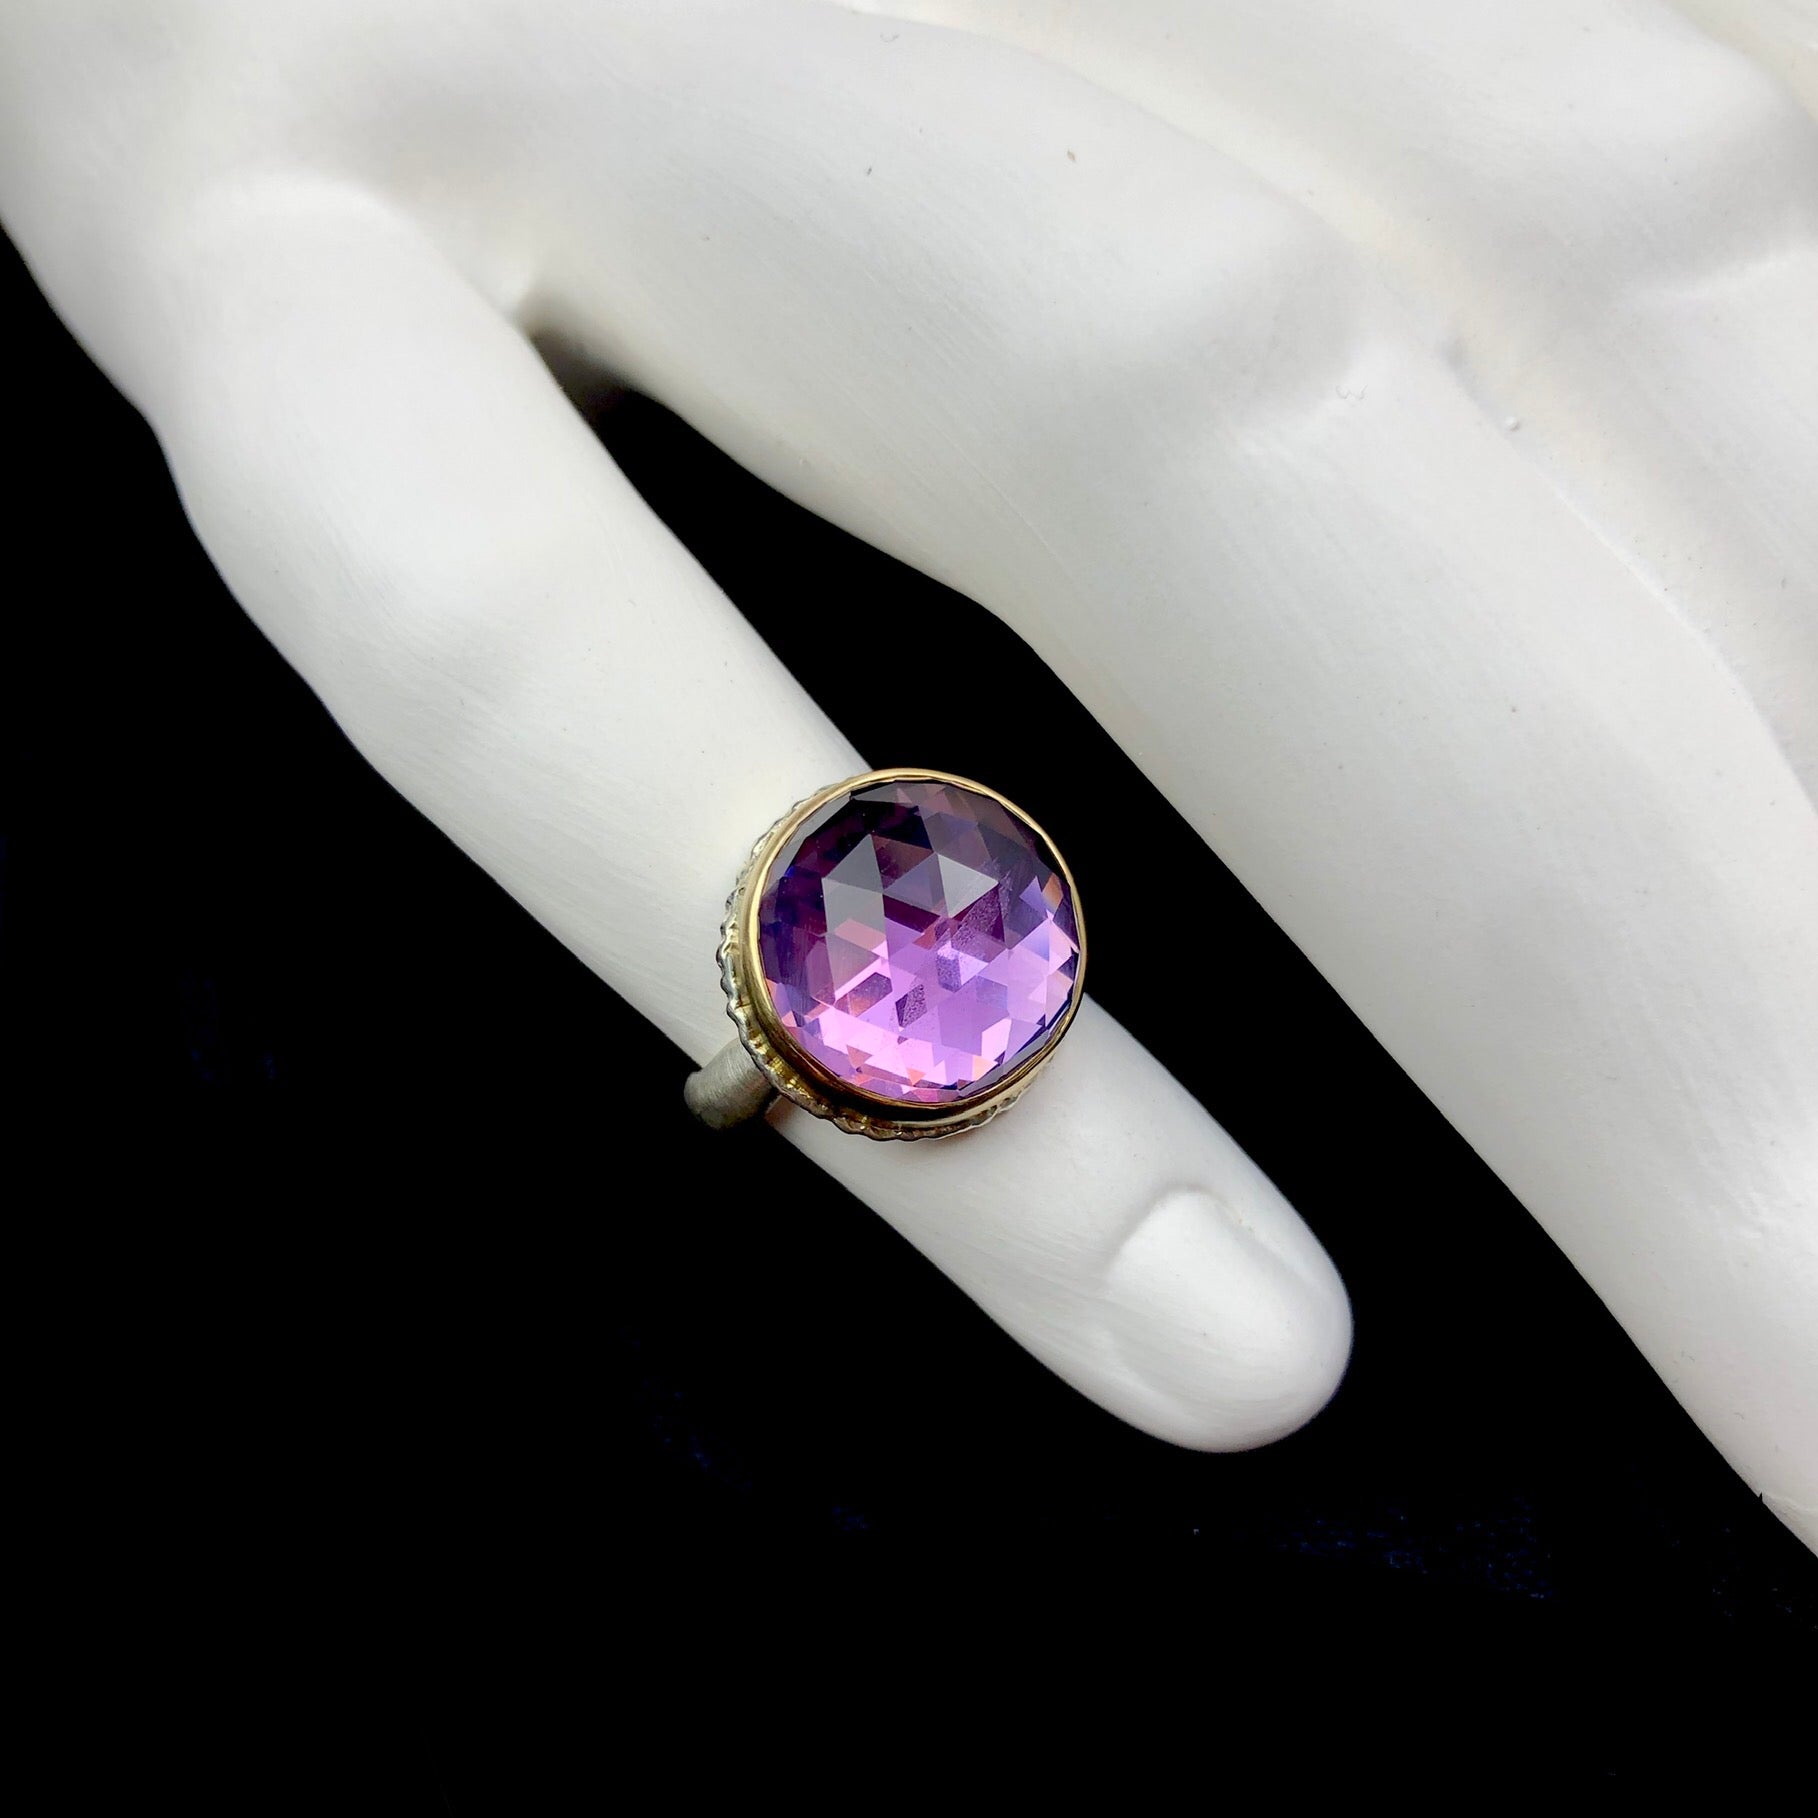 Round amethyst ring with ruffled stone setting shown on white ceramic finger